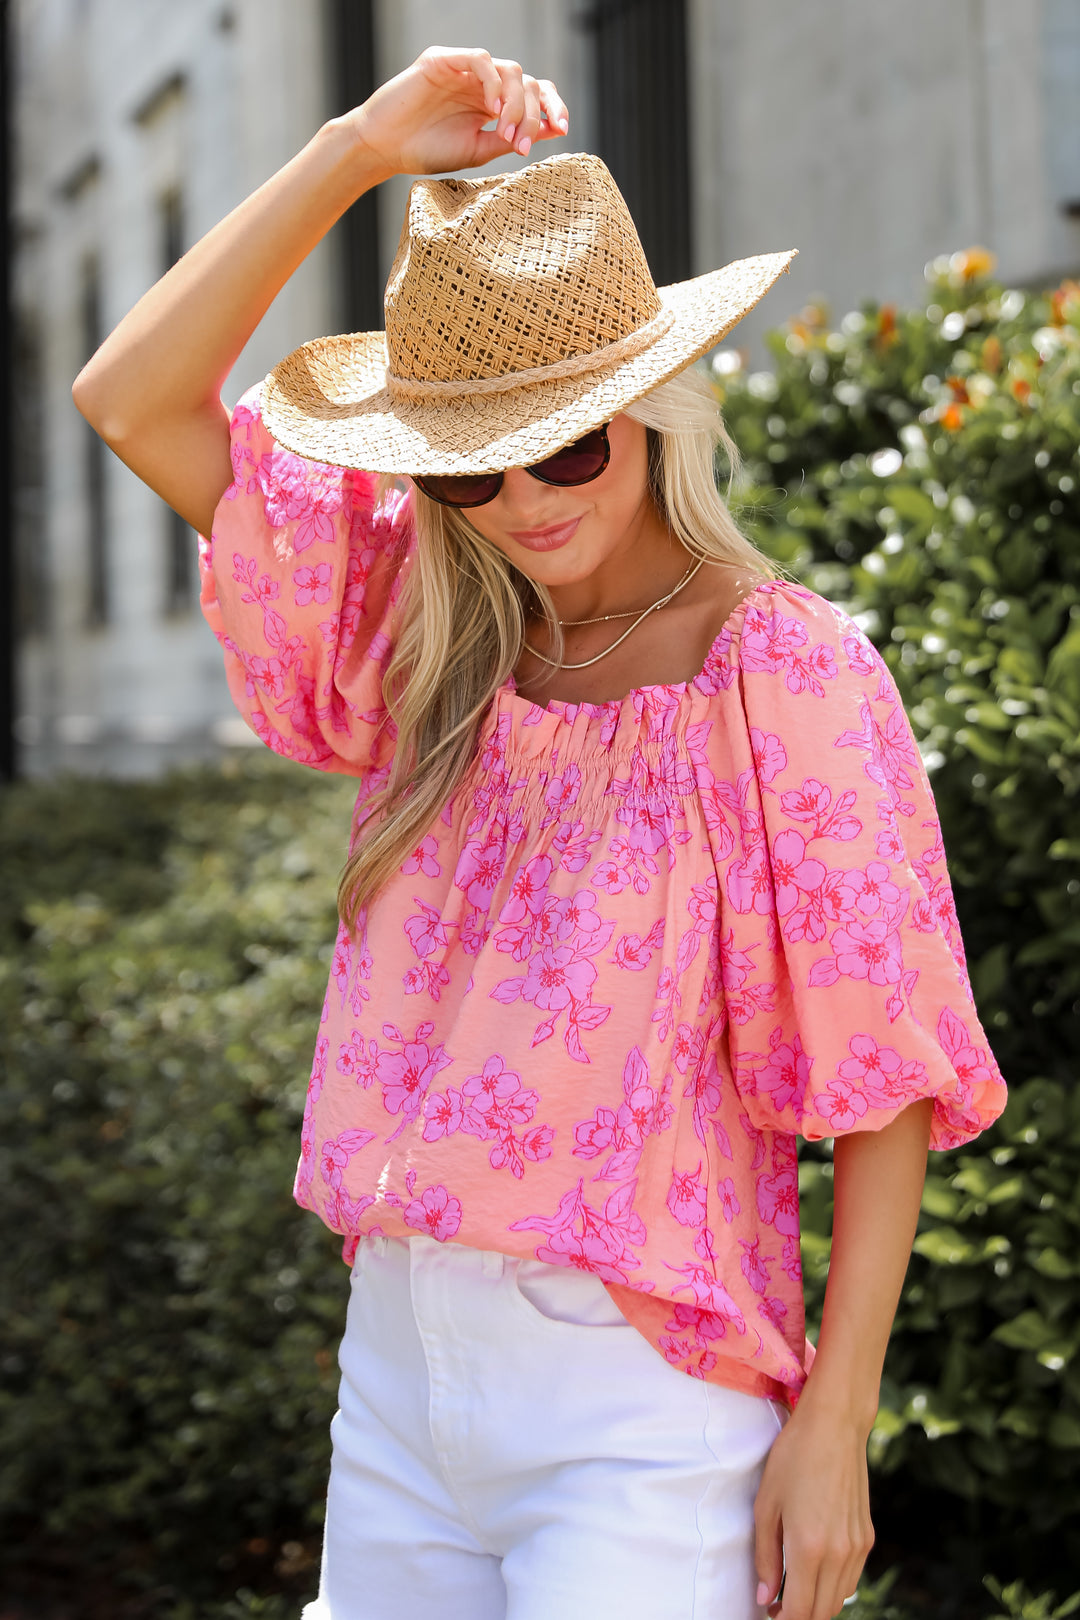 Clearly Stunning Coral Floral Blouse